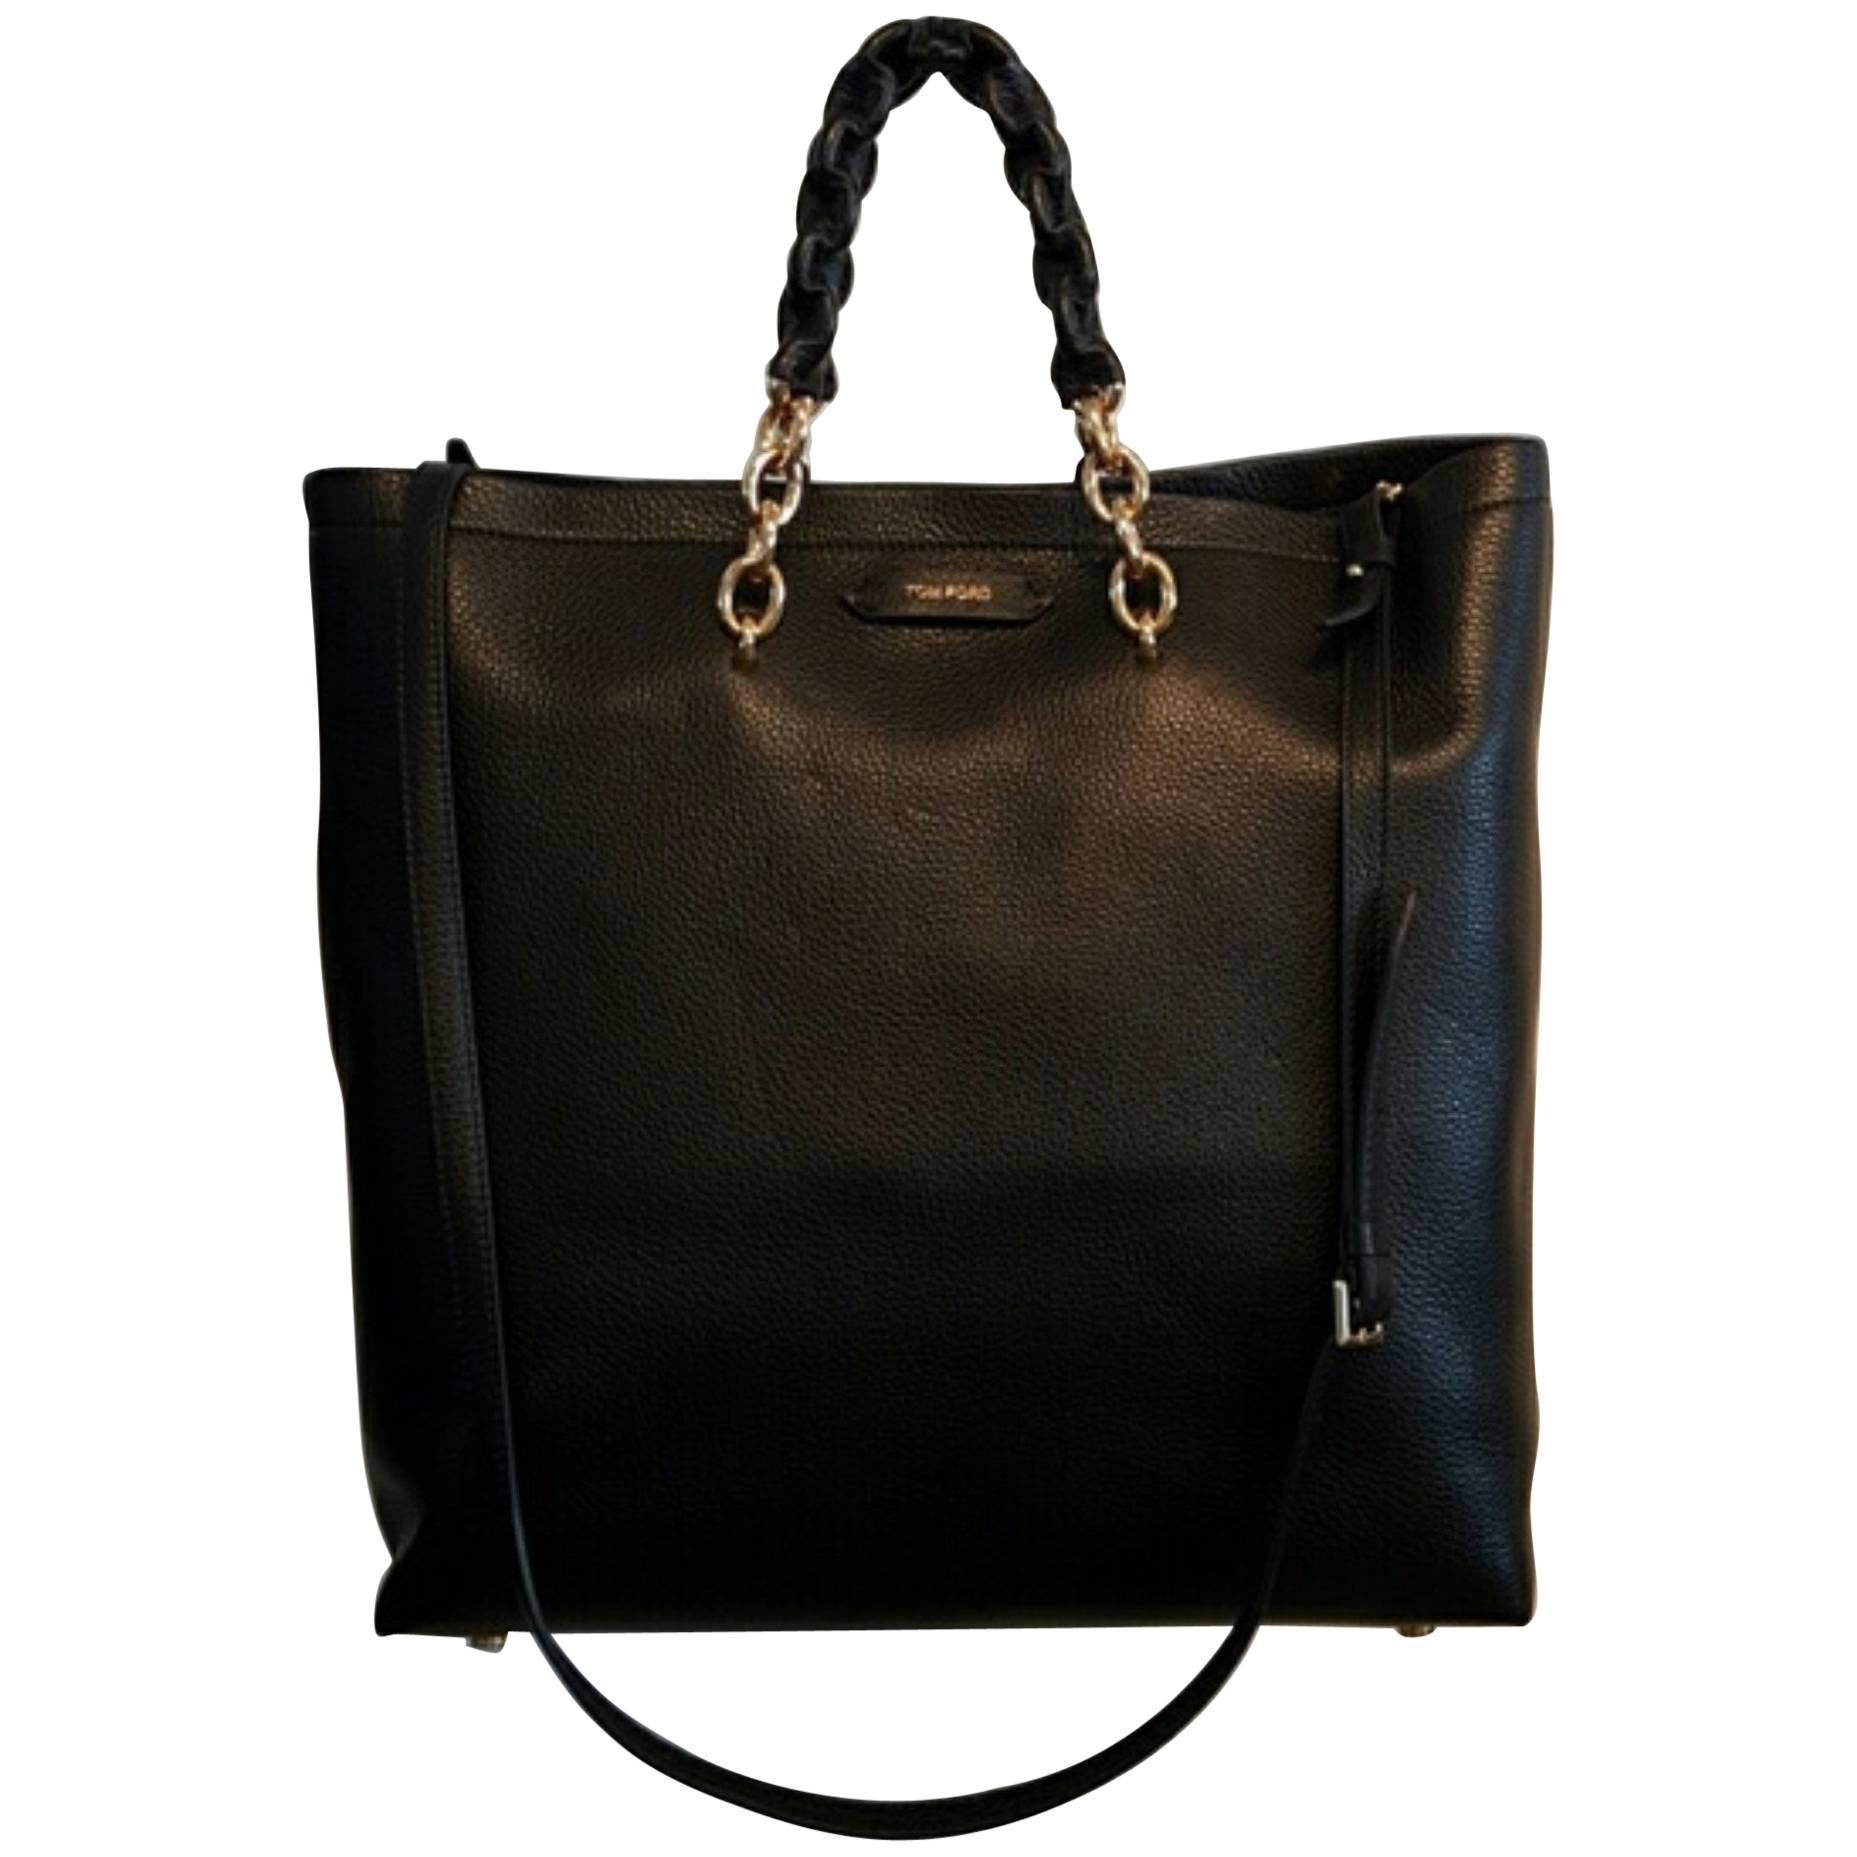 Tom Ford Leather Tote Bag (Black, Size - OS) For Sale